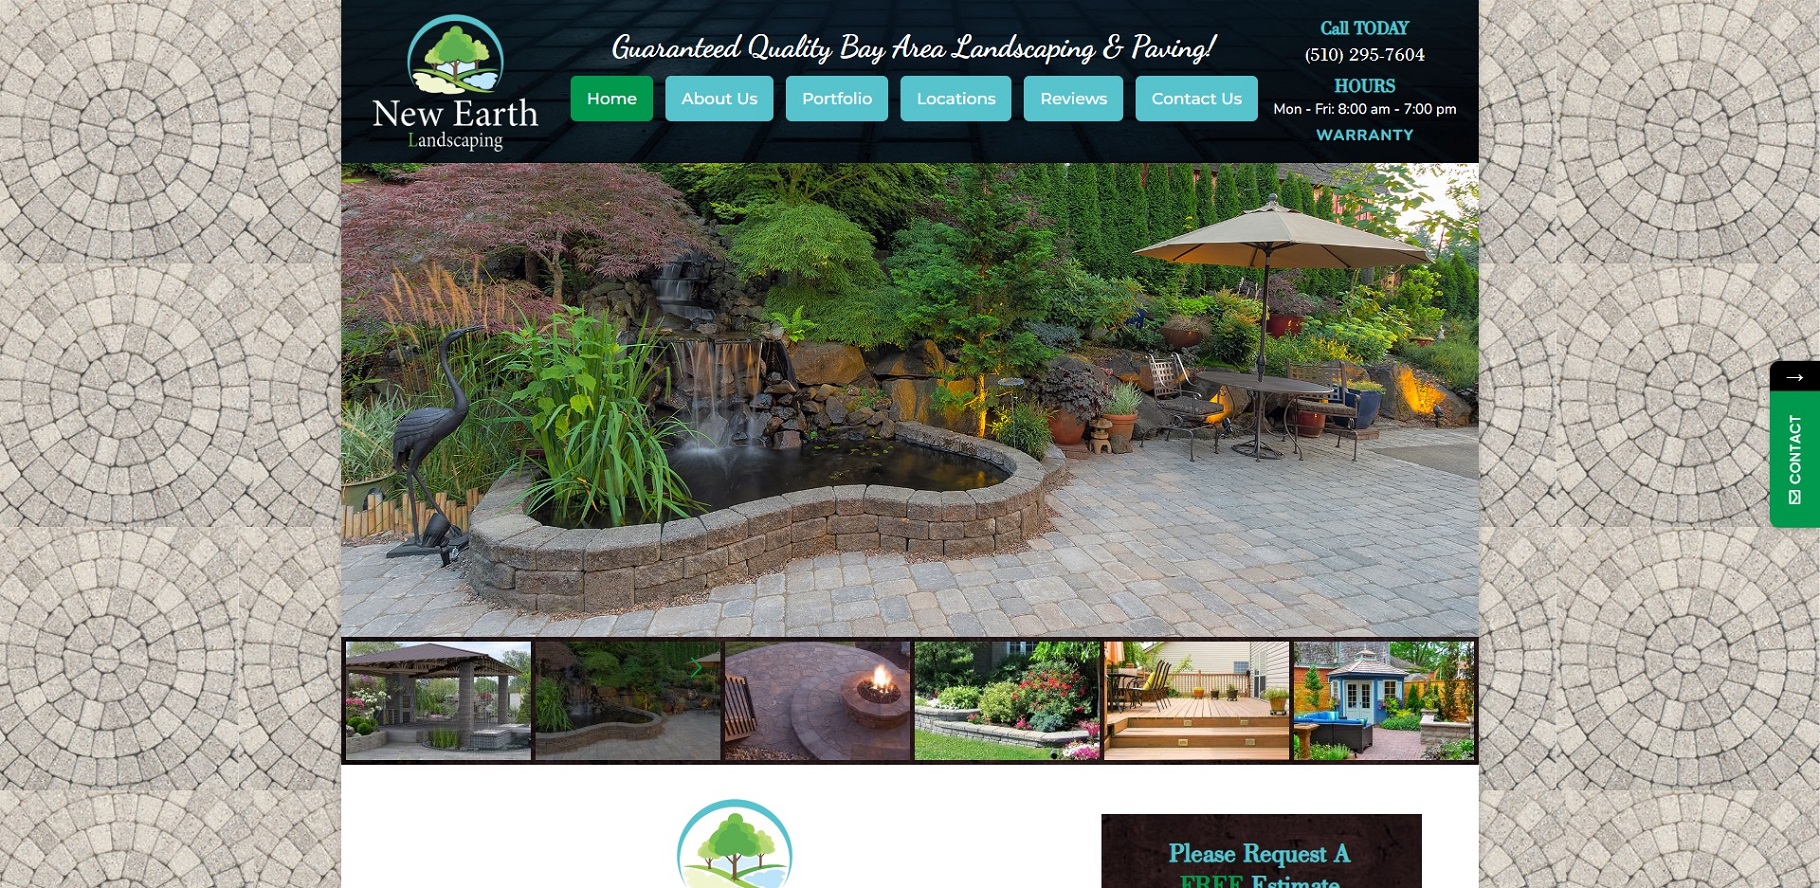 The Best Landscaping Companies in Oakland, CA